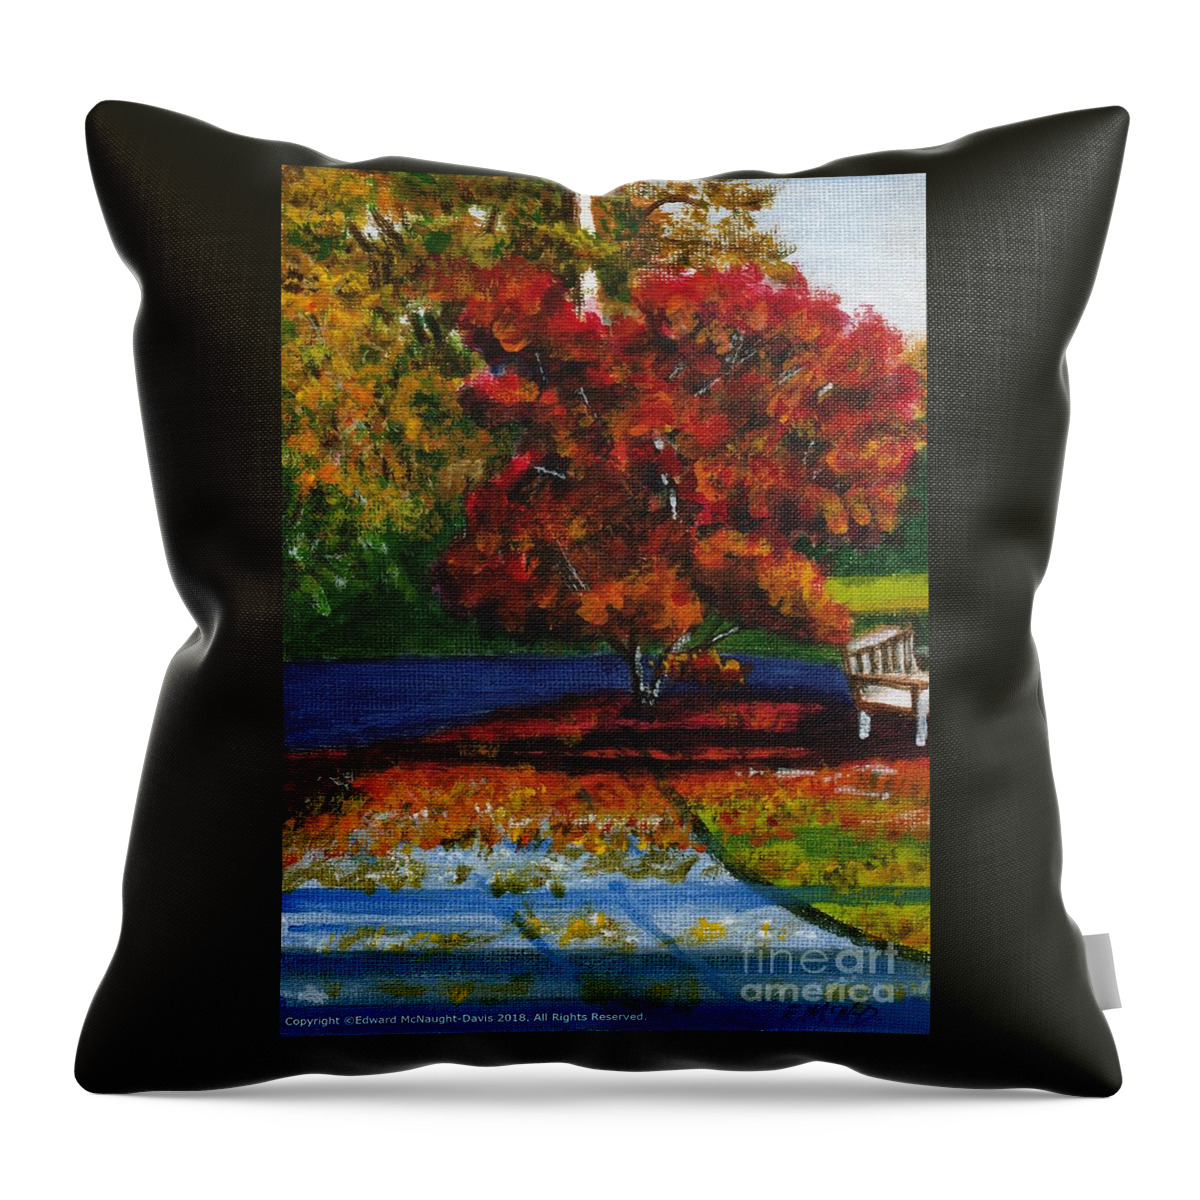 Japanese Red Maple Tree Throw Pillow featuring the painting Japanese Red Maple Tree Talsarn Lampeter Ceredigion Wales by Edward McNaught-Davis